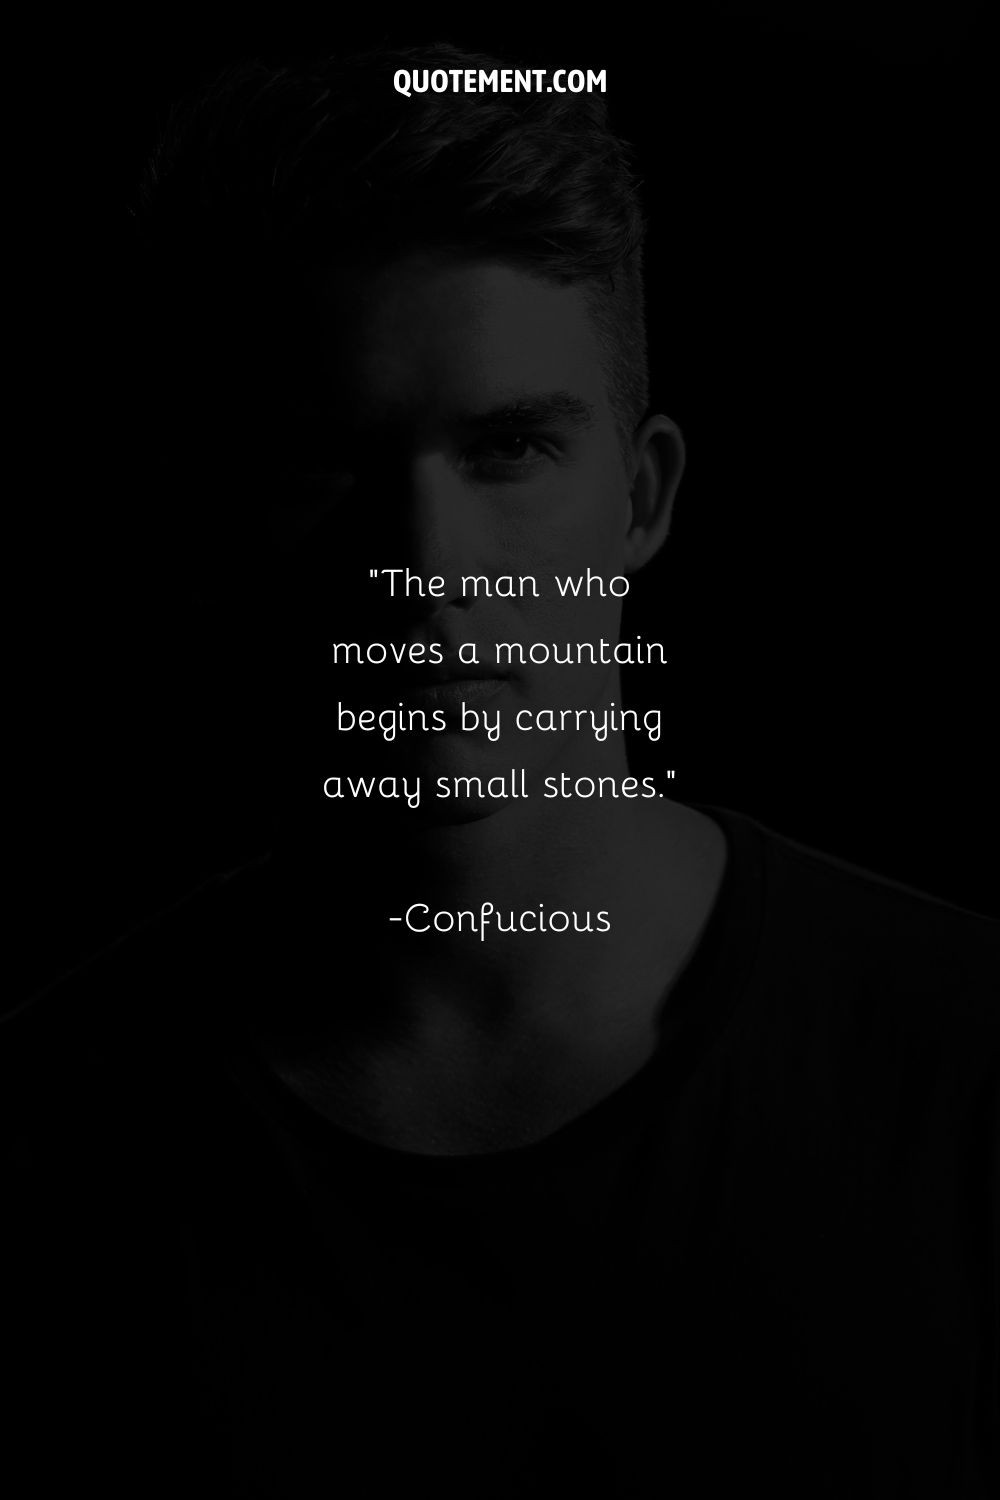 portrait of a young man representing a quote by Confucious